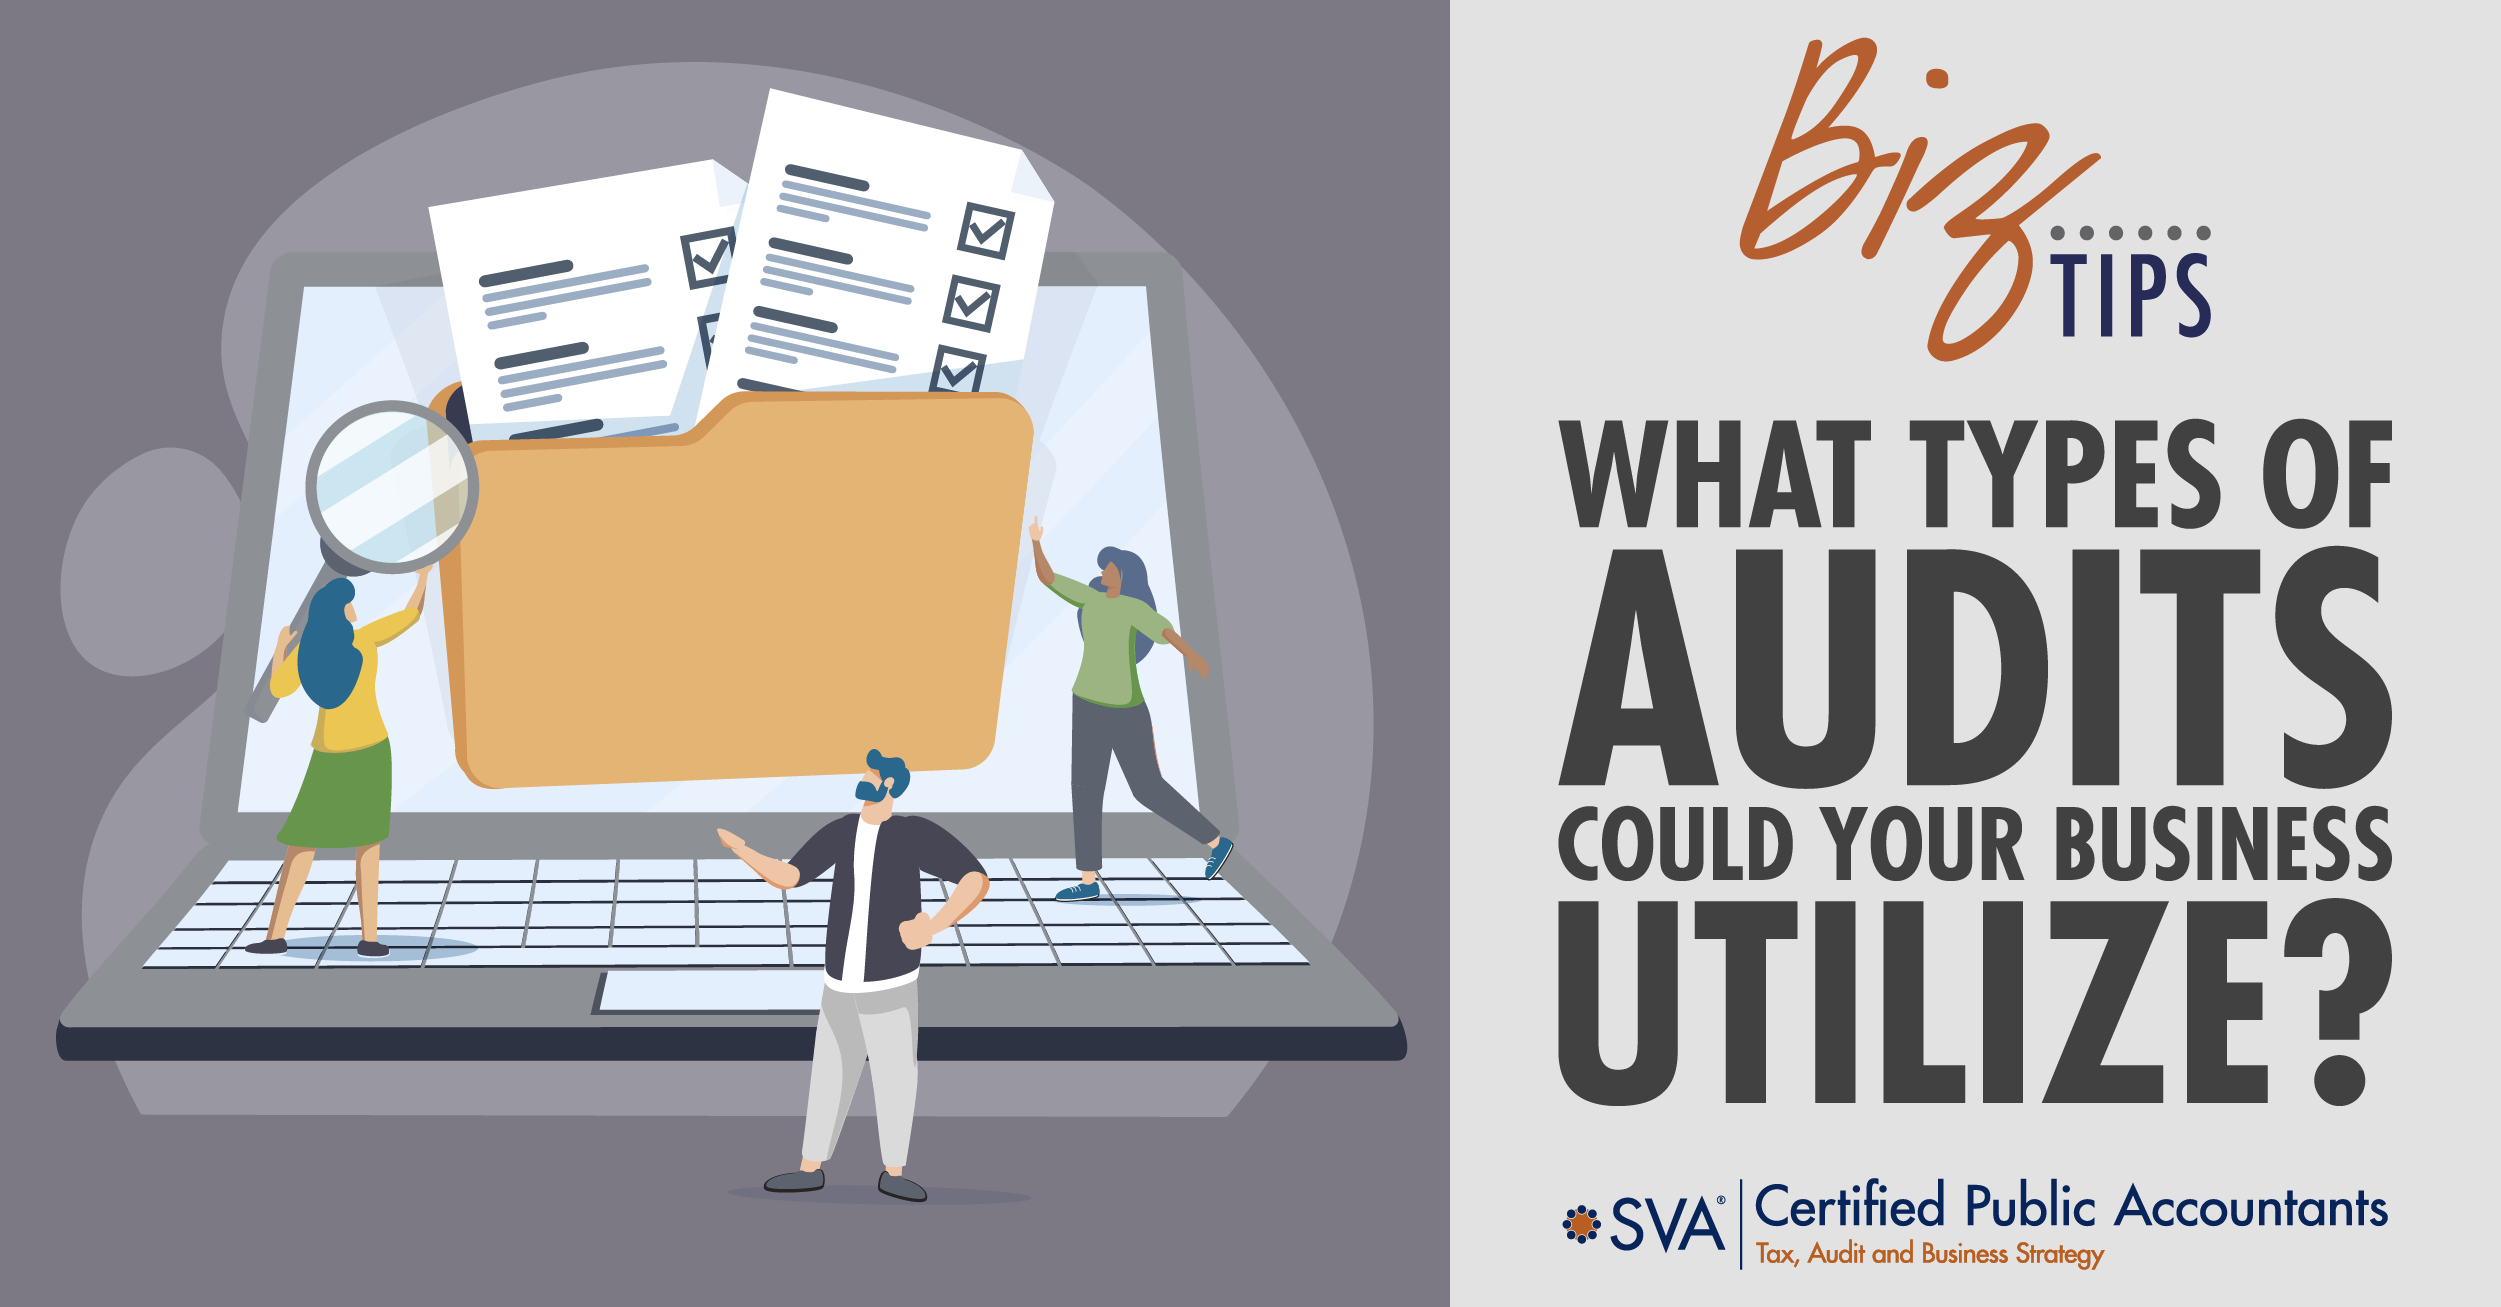 What Types of Audits Could Your Business Utilize?